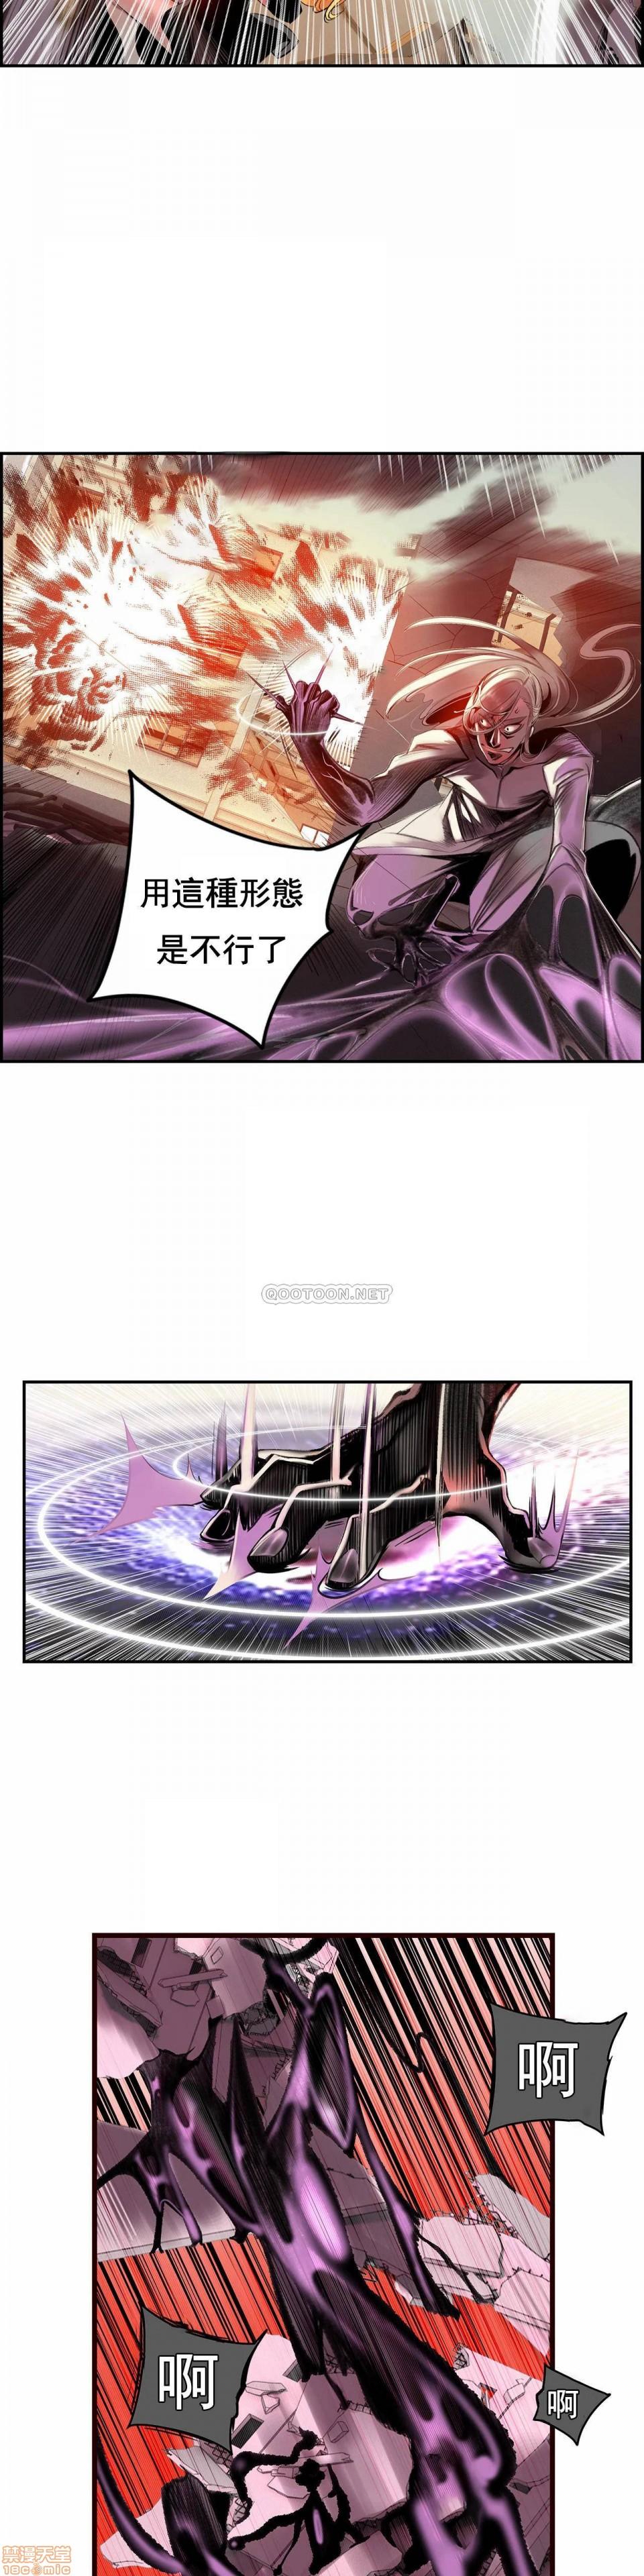 [Juder] Lilith`s Cord (第二季) Ch.77-93 end [Chinese] 123